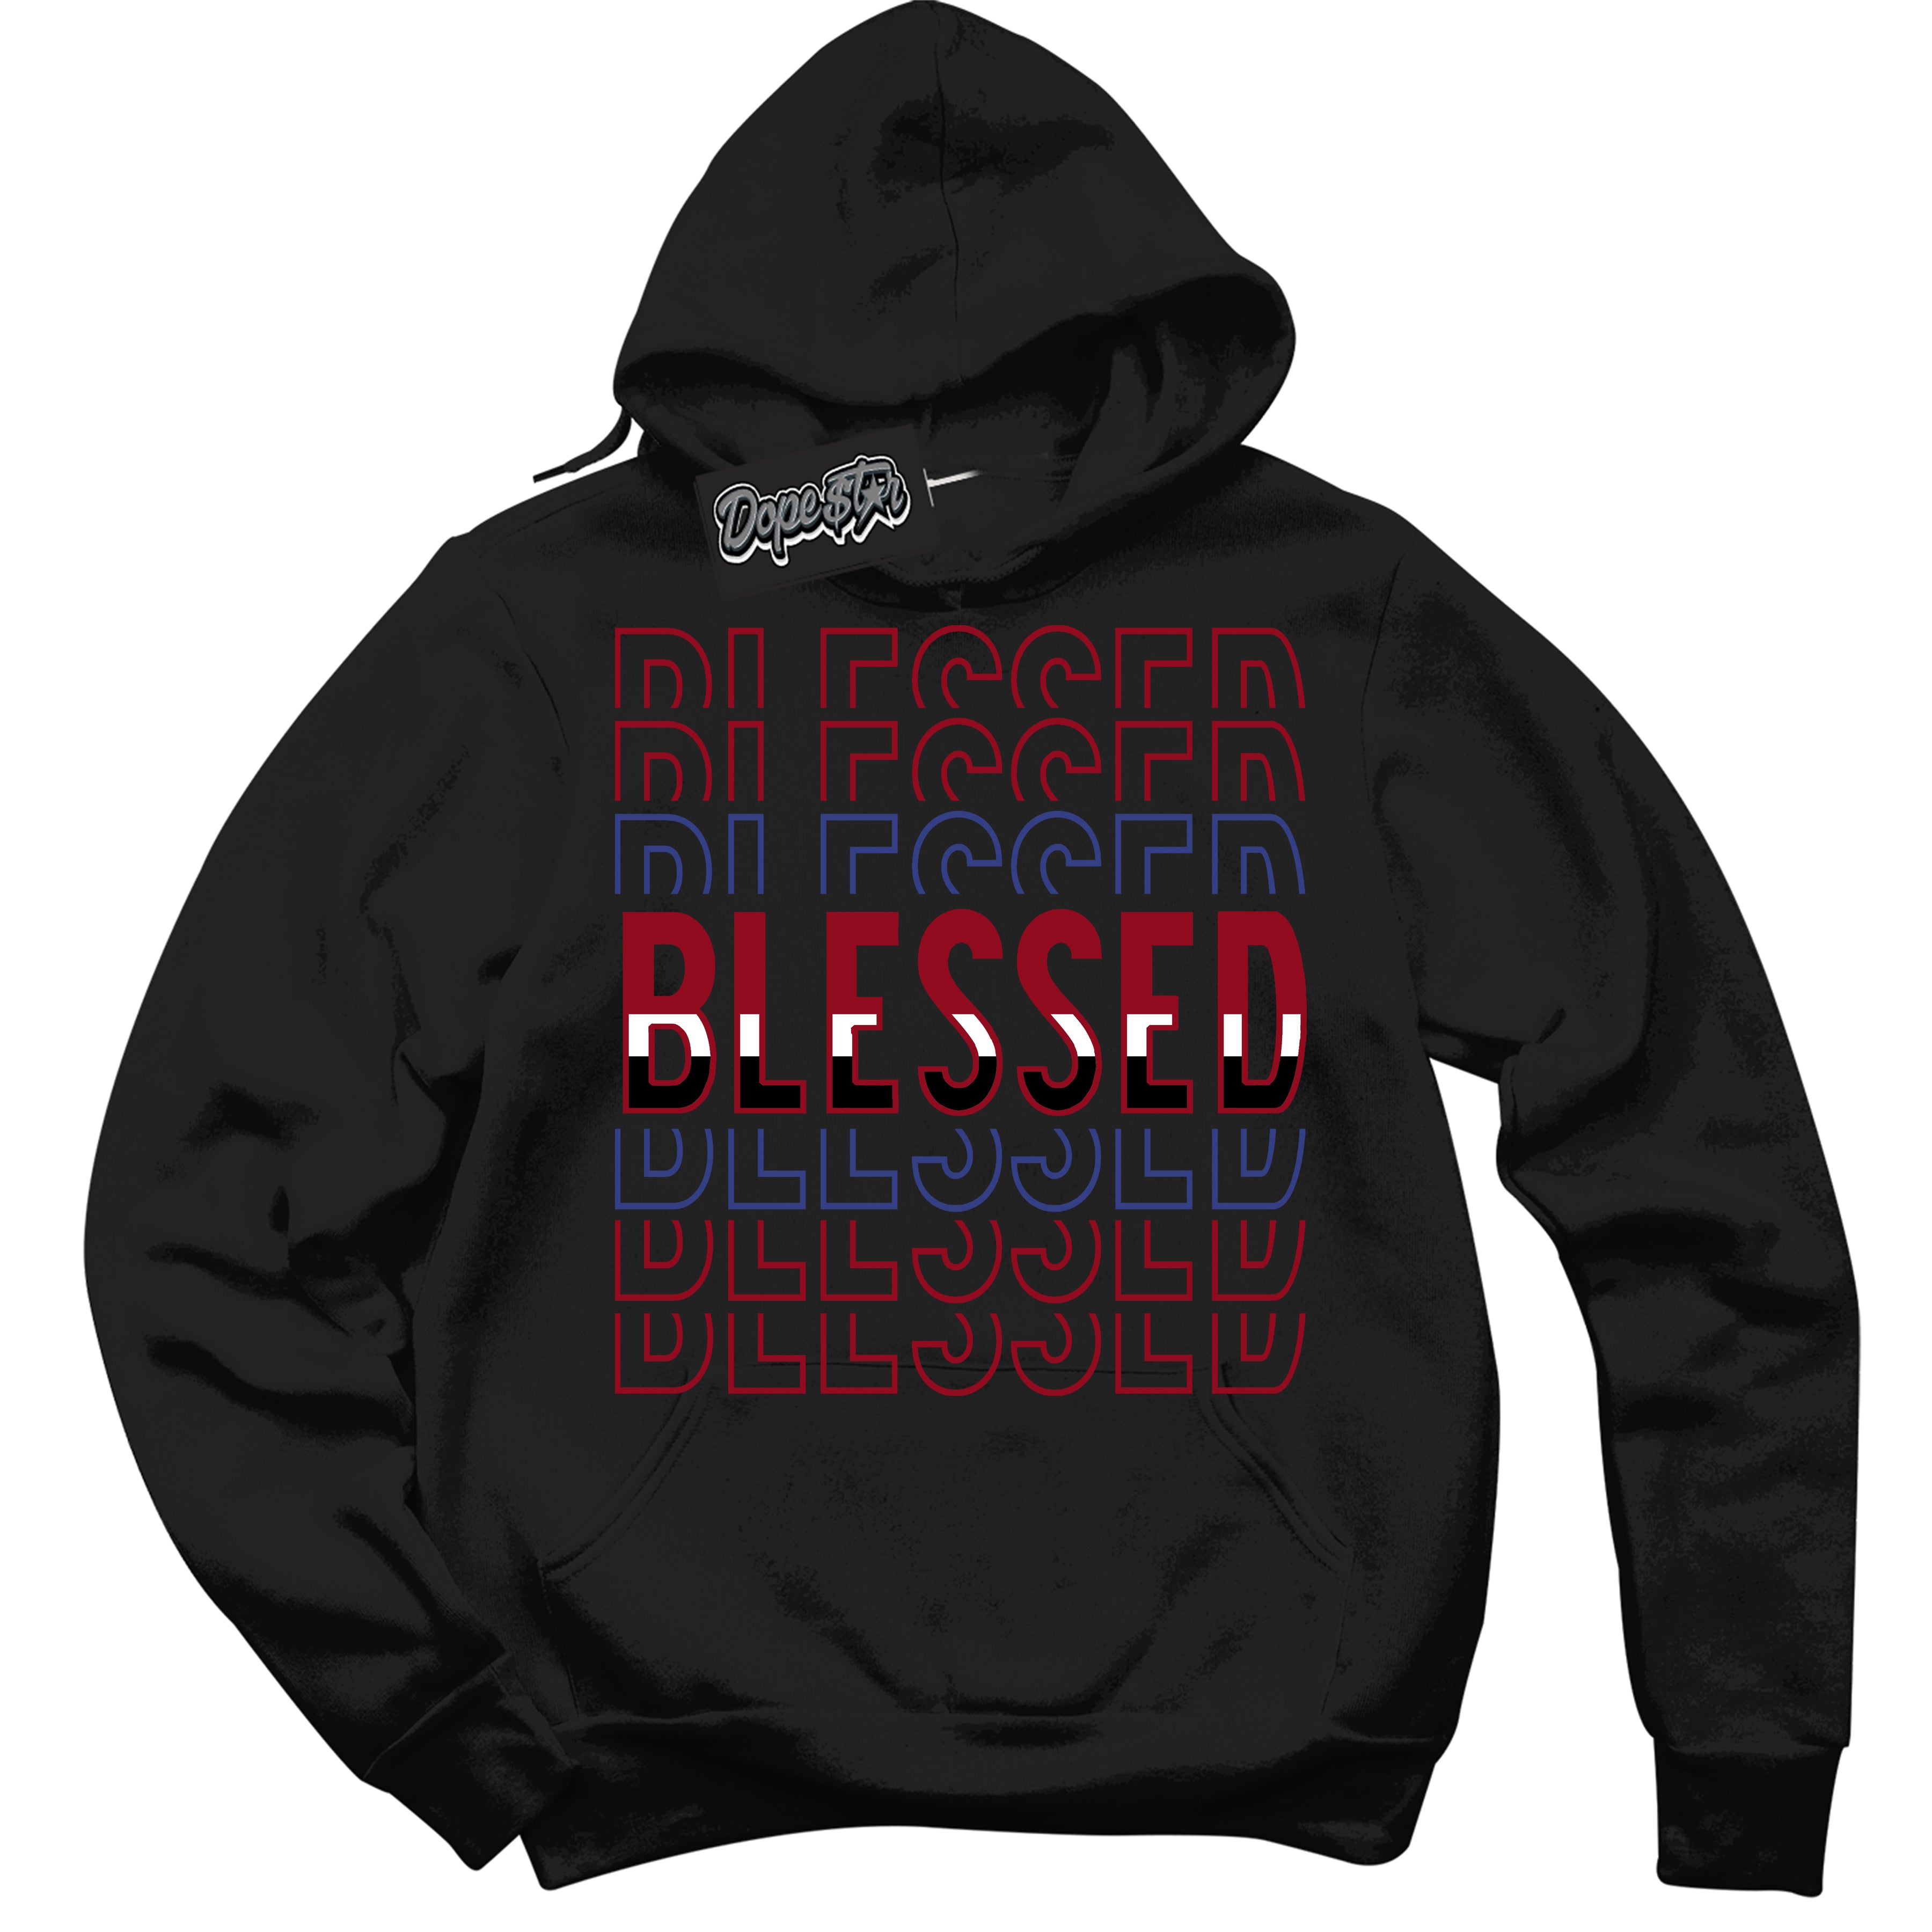 Cool Black Hoodie with “ Blessed Stacked ”  design that Perfectly Matches Playoffs 8s Sneakers.